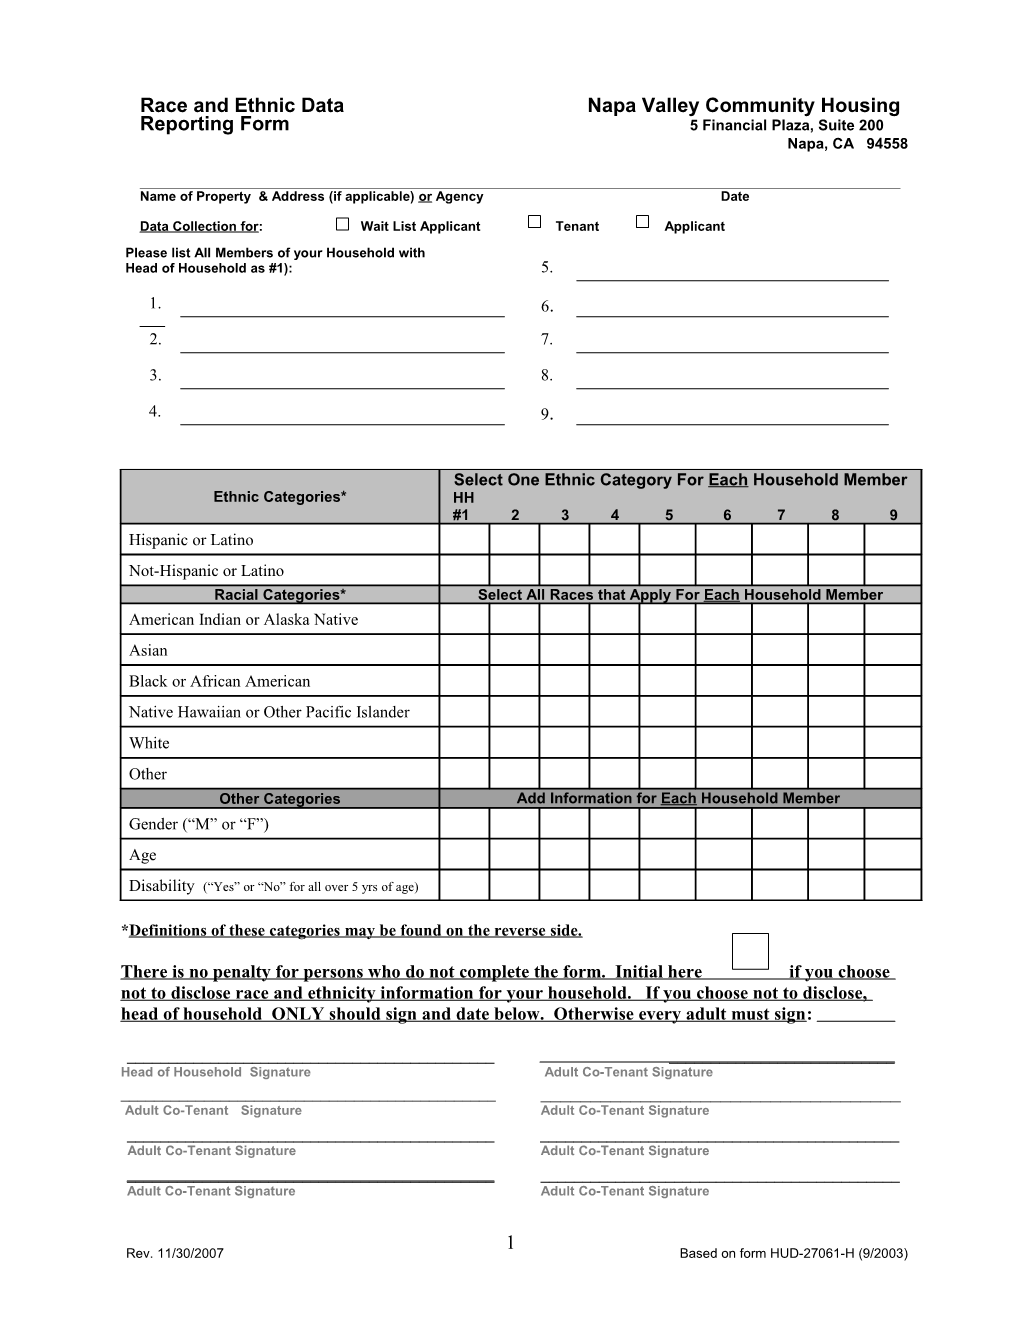 Race and Ethnic Data Collection Form